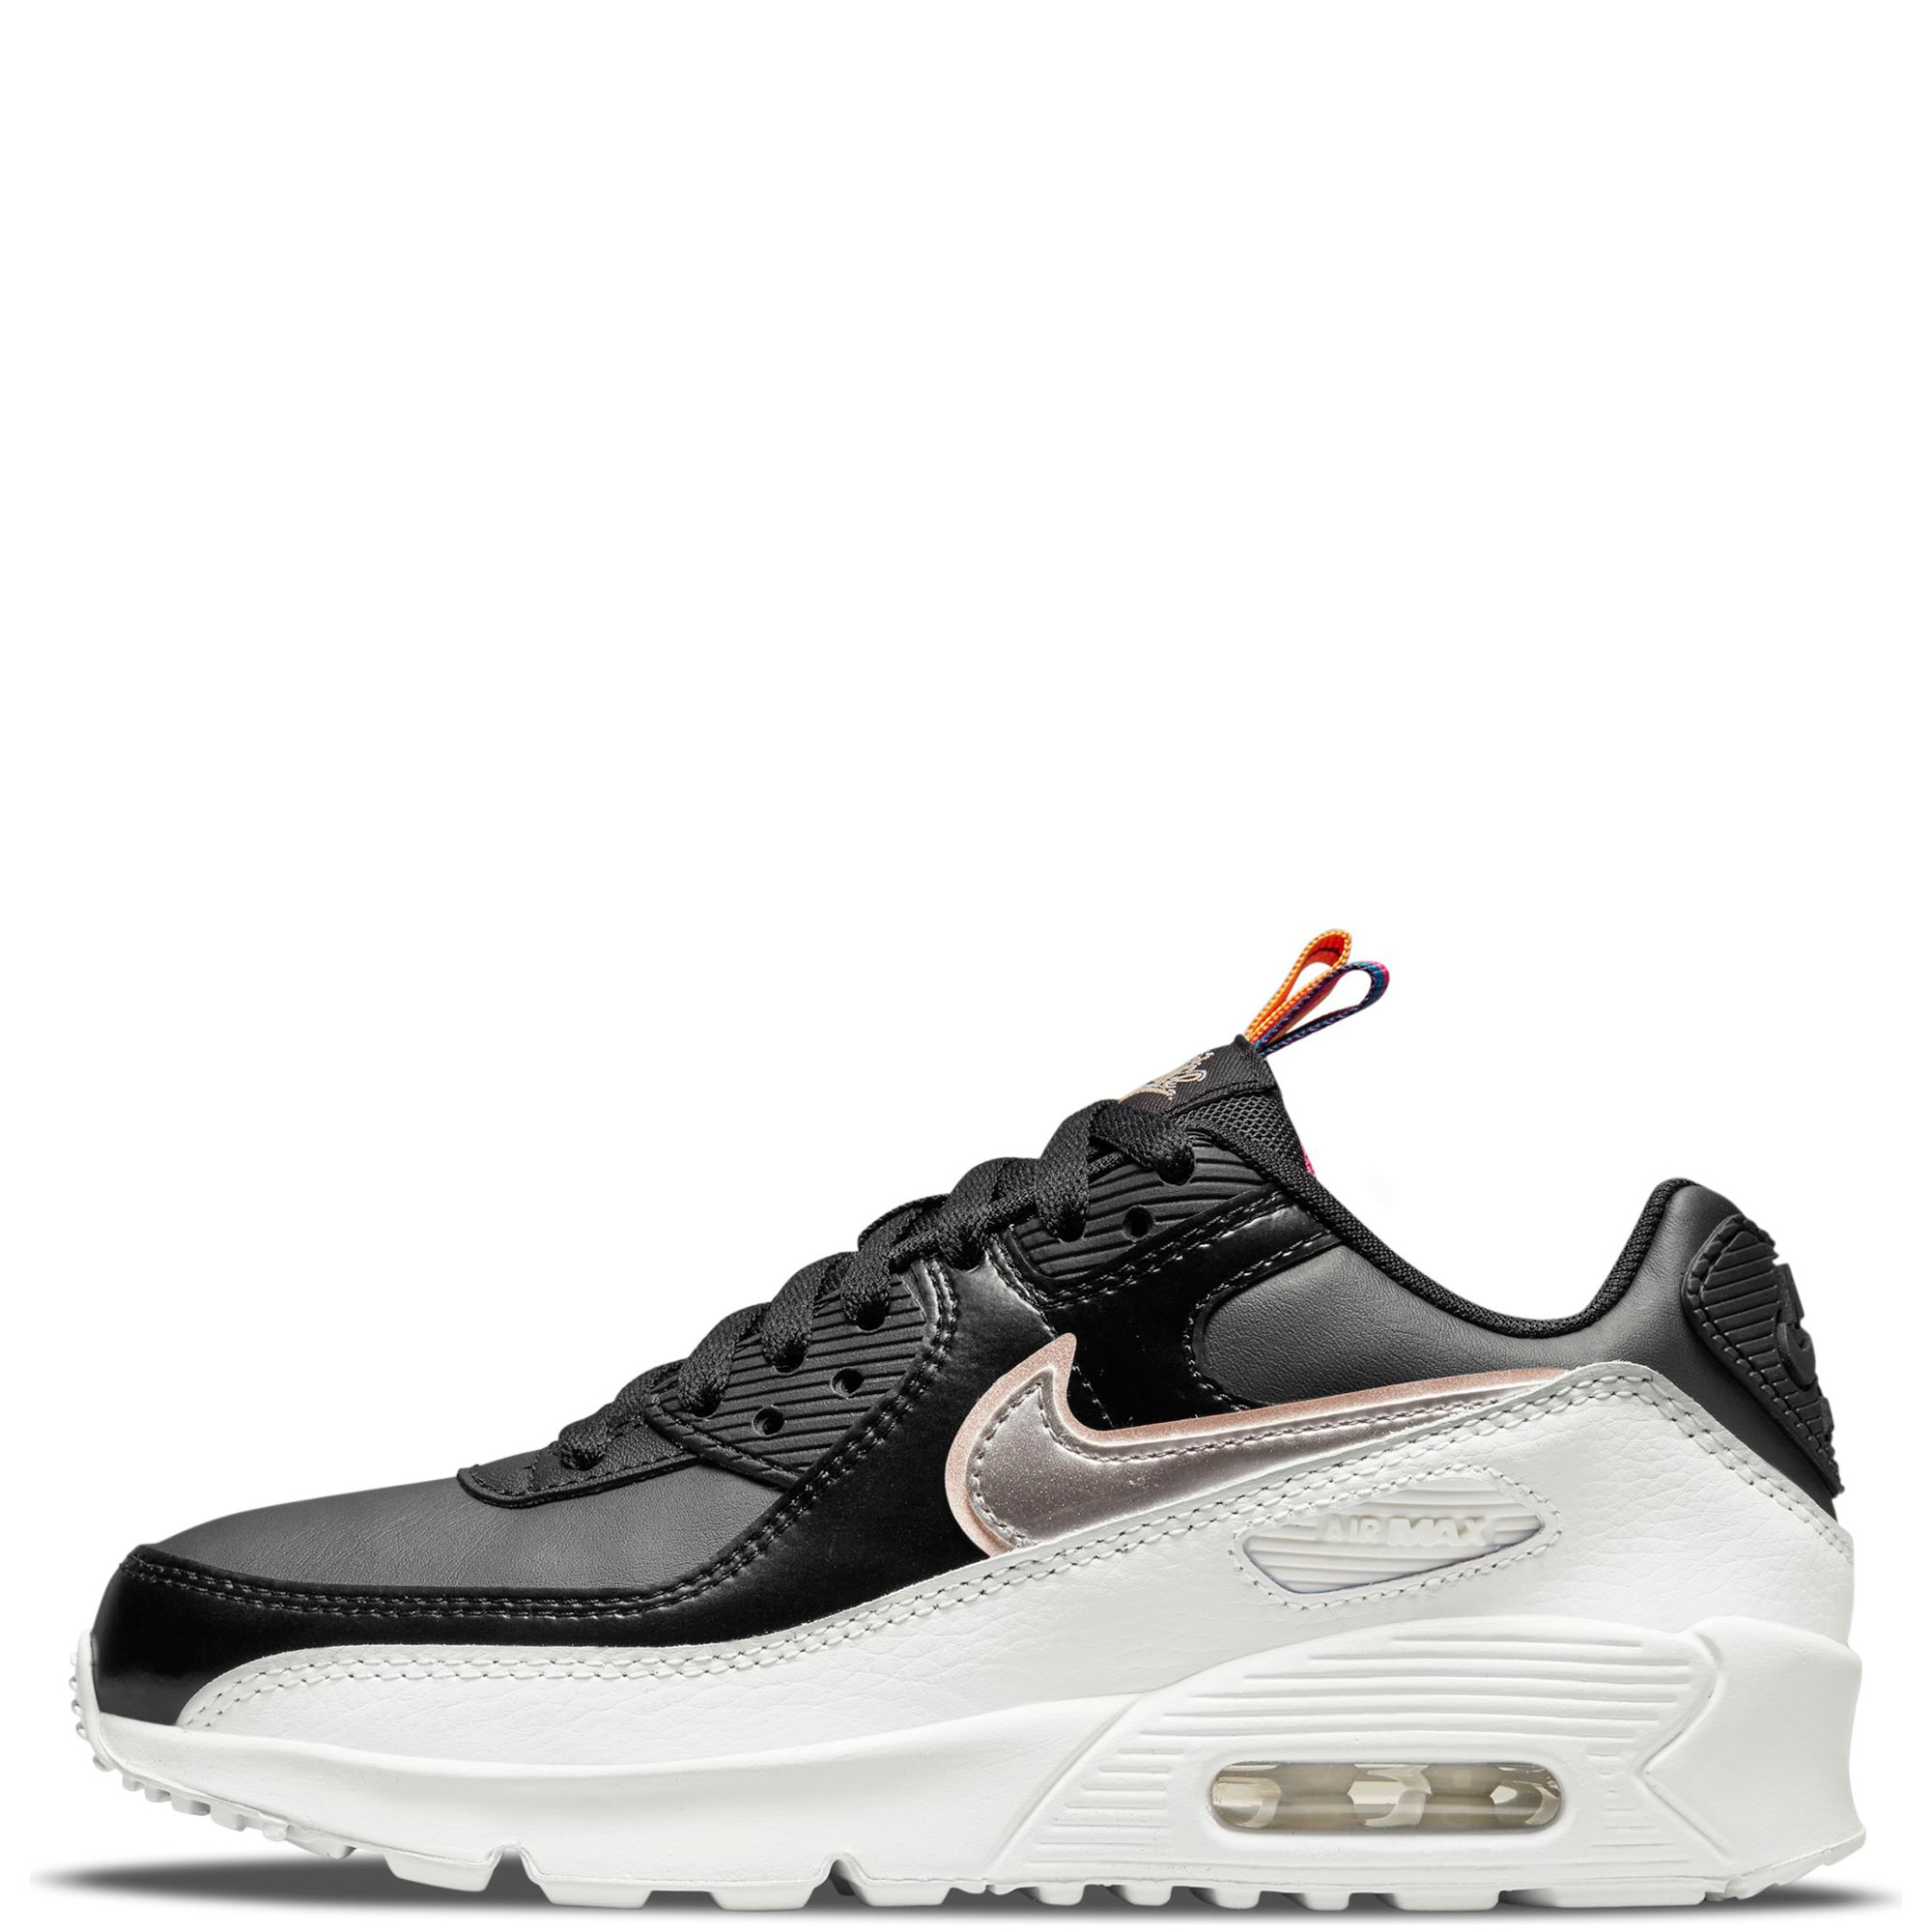 suicide Show you Paternal NIKE (GS) Air Max 90 LTR SE DJ0414 001 - Shiekh